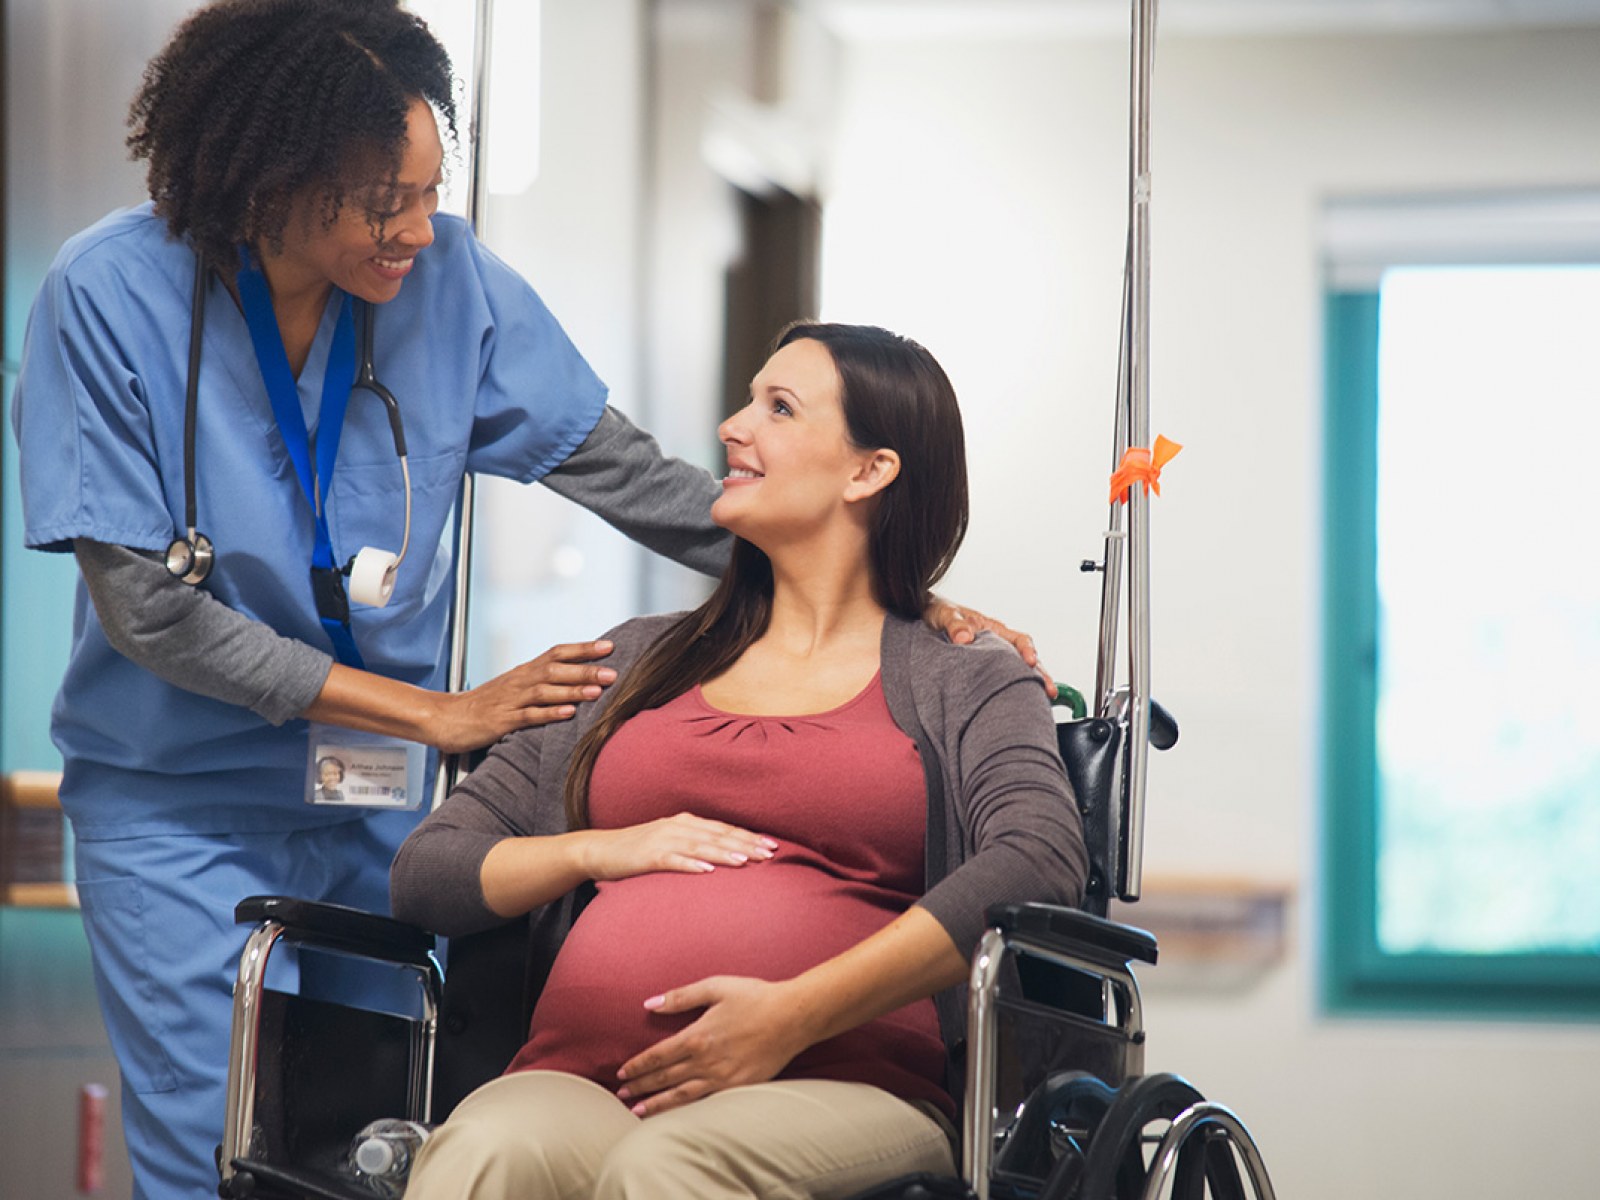 Top 10 Hospitals with the best childbirth services in the US